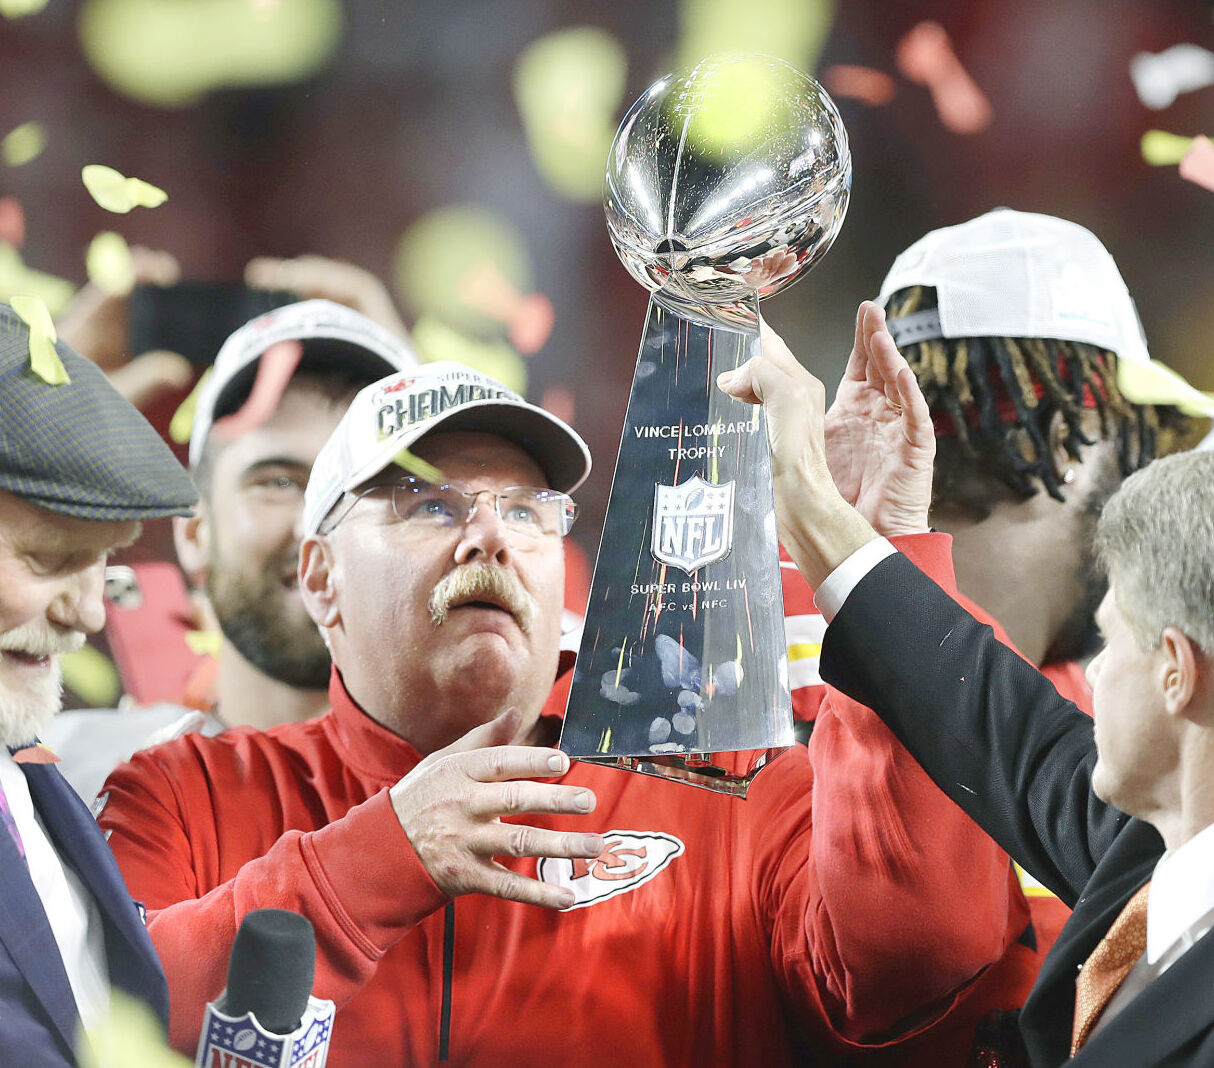 Do you think the Chiefs will repeat as Super Bowl champs?